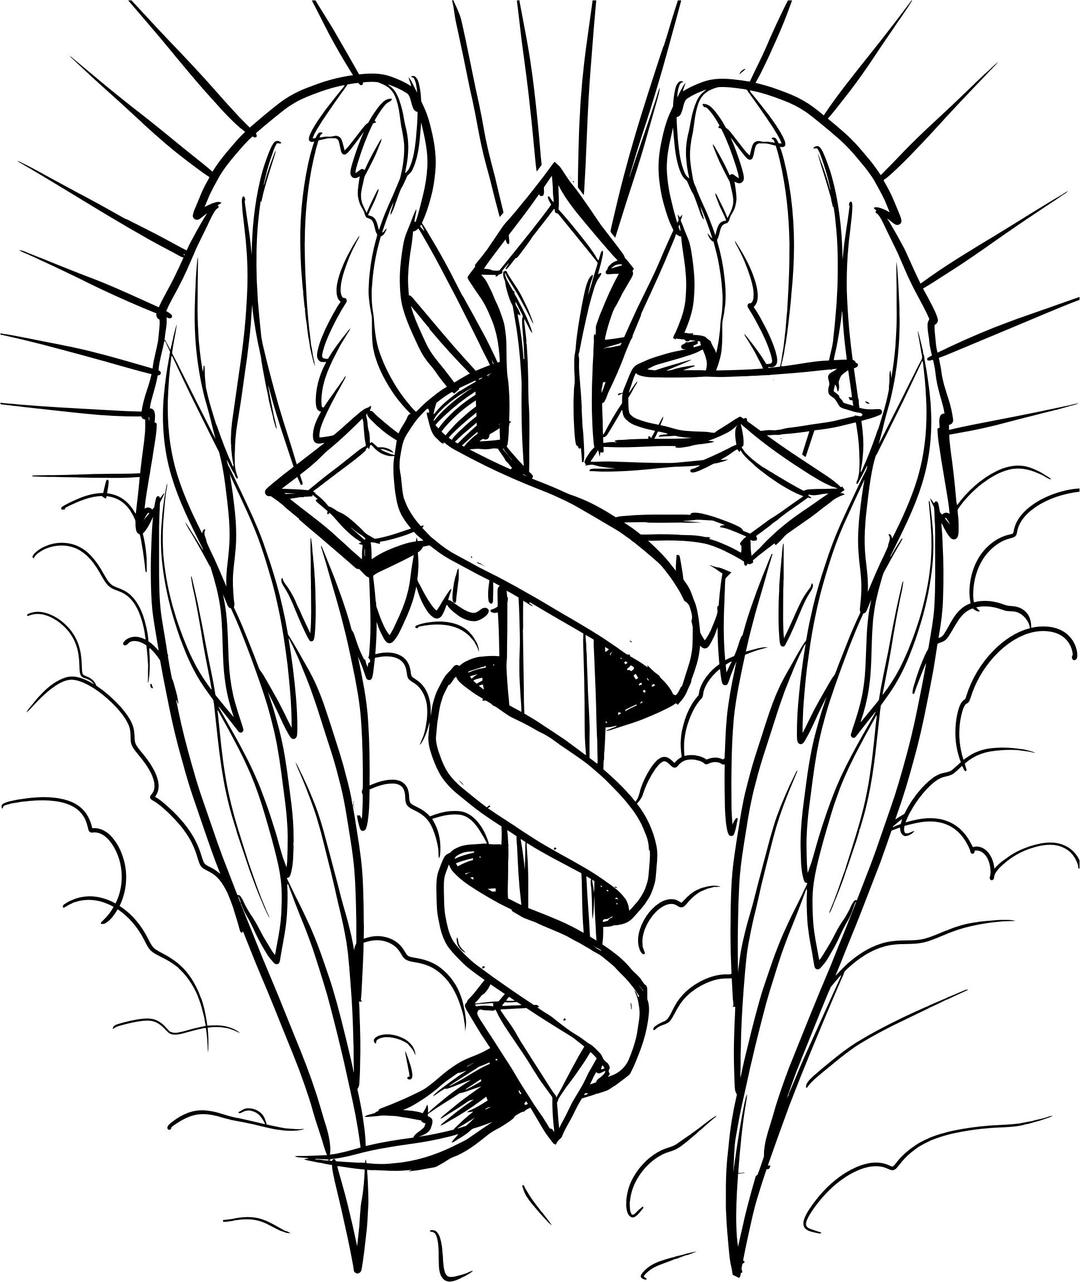 Radiant Cross With Wings In The Clouds Line Art png transparent